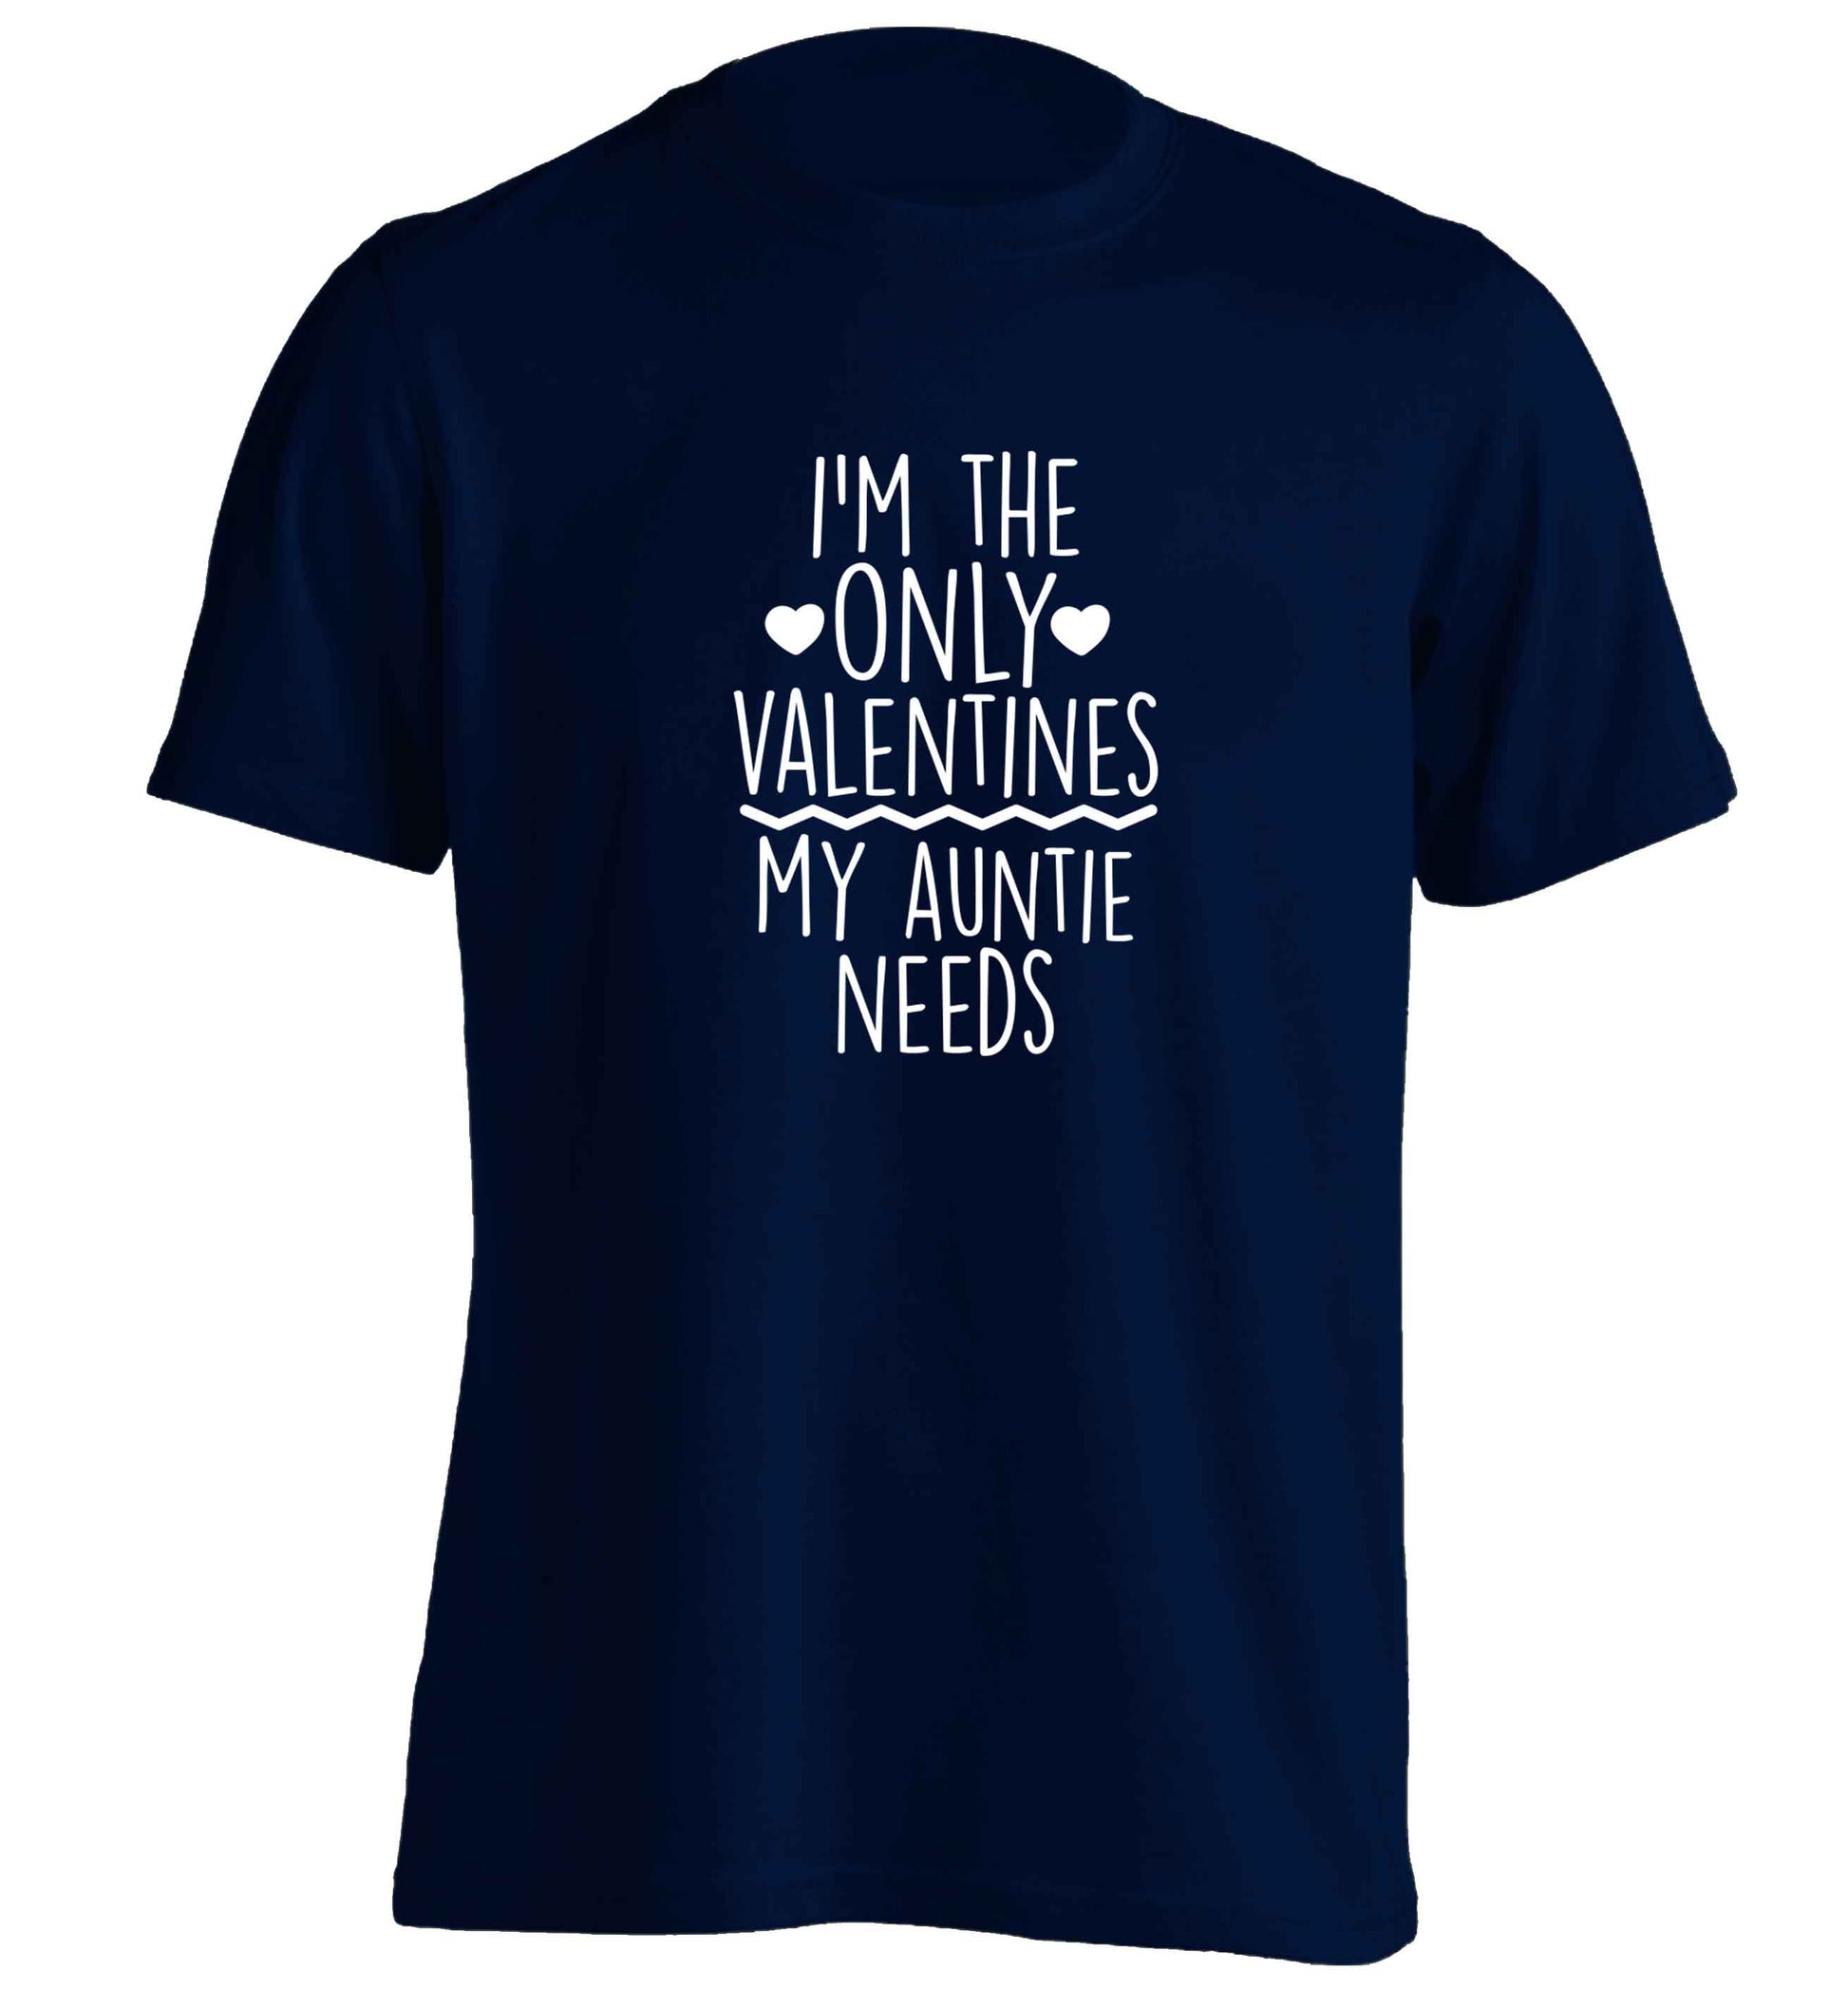 I'm the only valentines my auntie needs adults unisex navy Tshirt 2XL